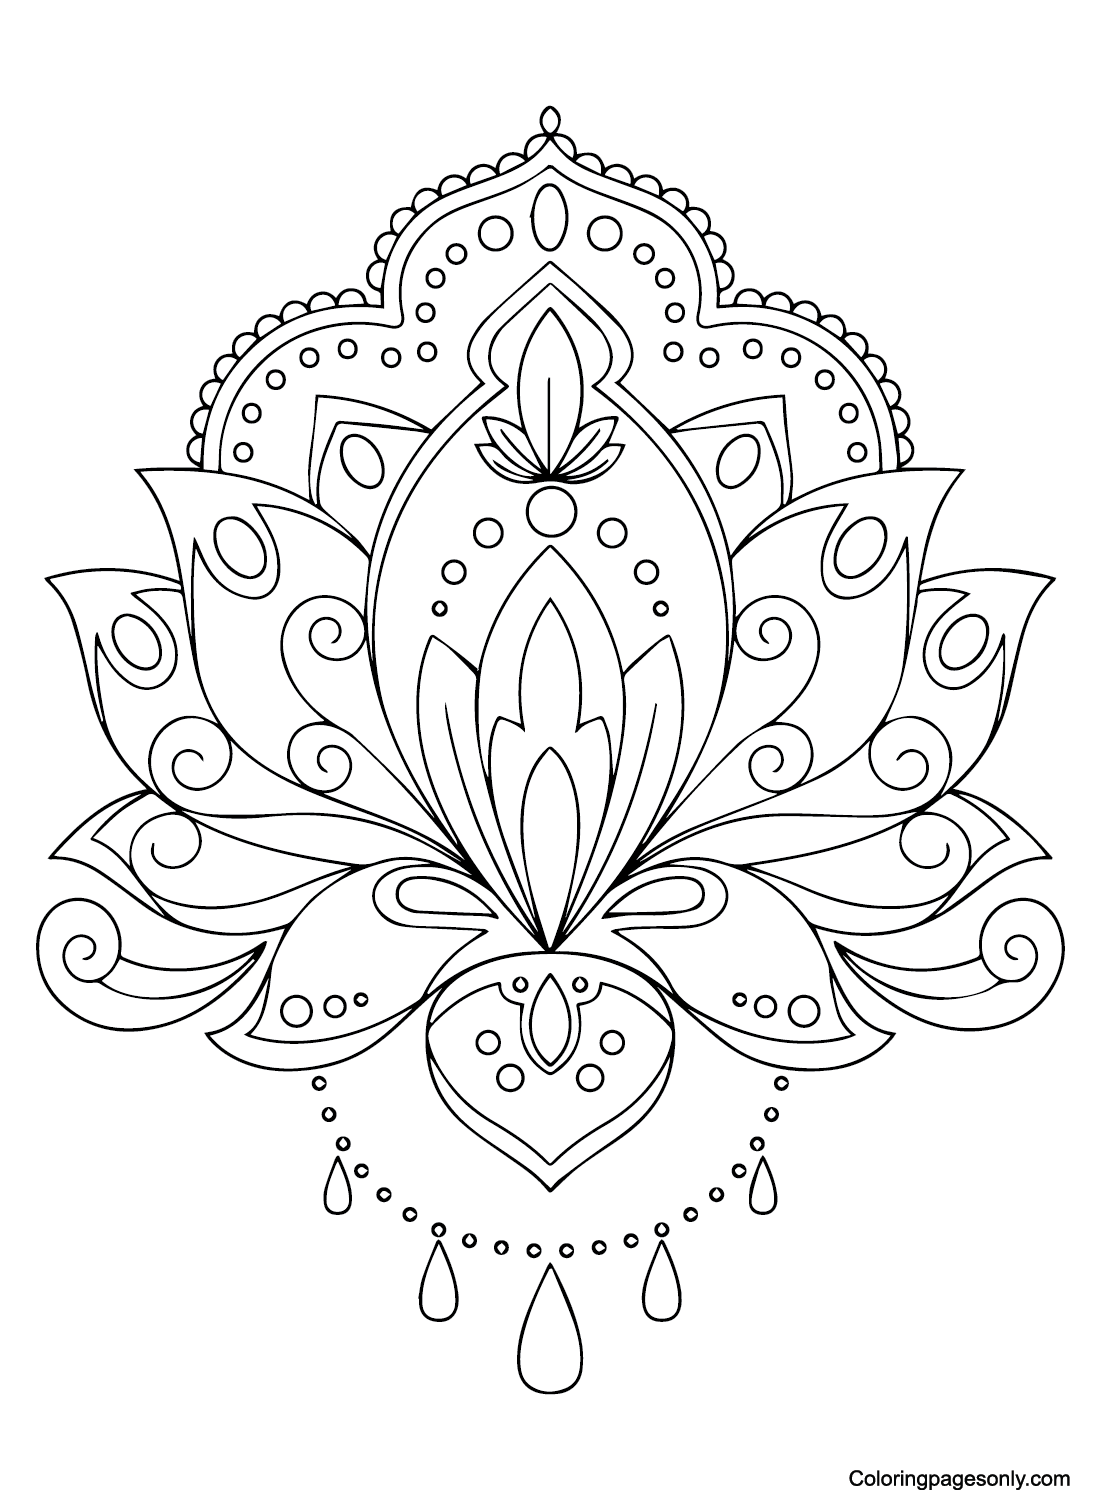 Mindfulness Pictures printable Coloring Page